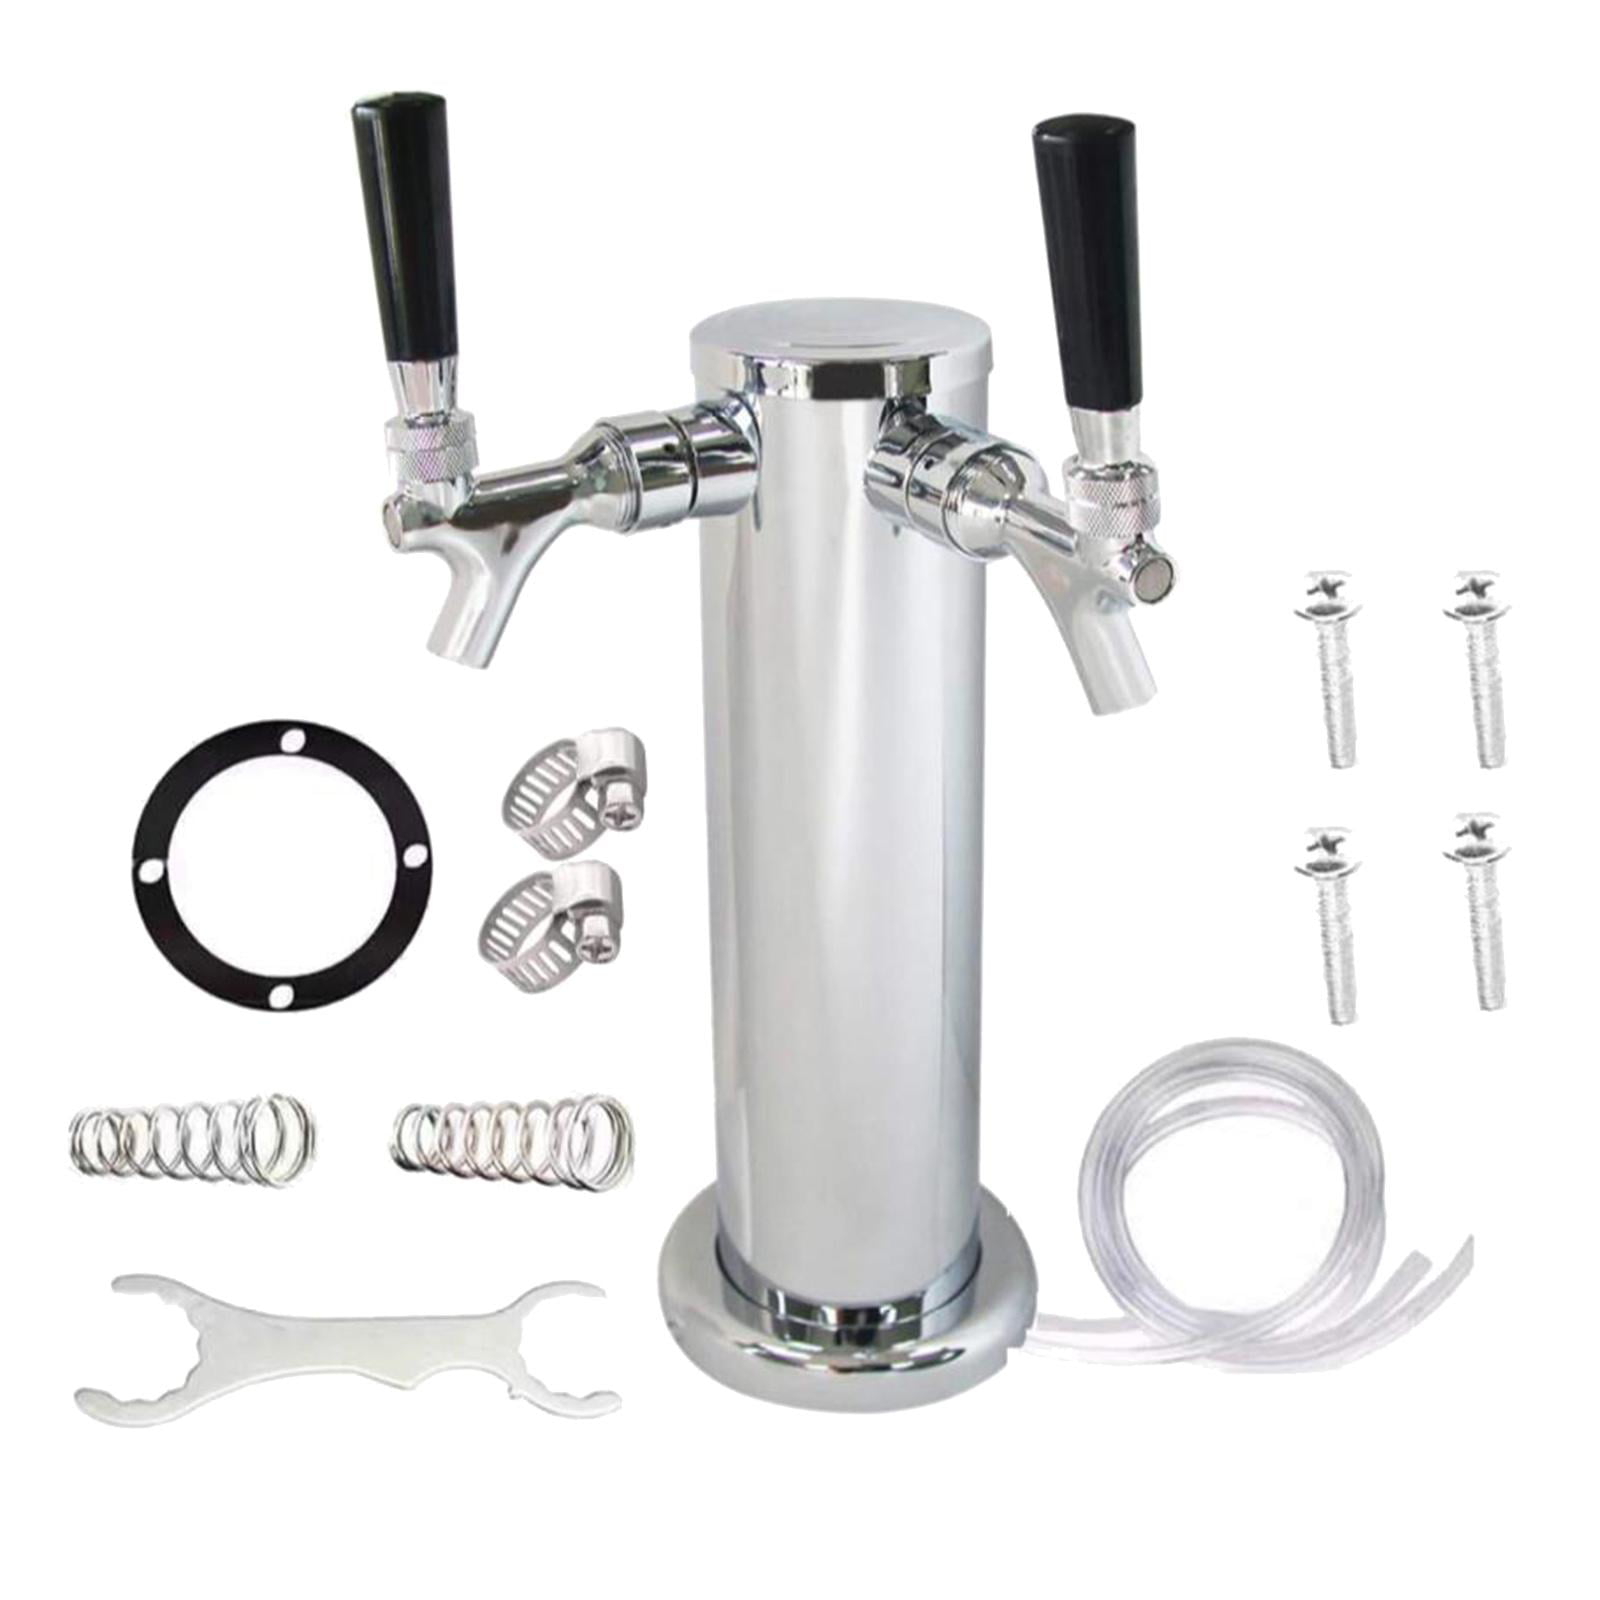 4 Tap Faucet Draft Beer Tower Stainless For Kegerator Home Brew Silver 1.2m Tube 